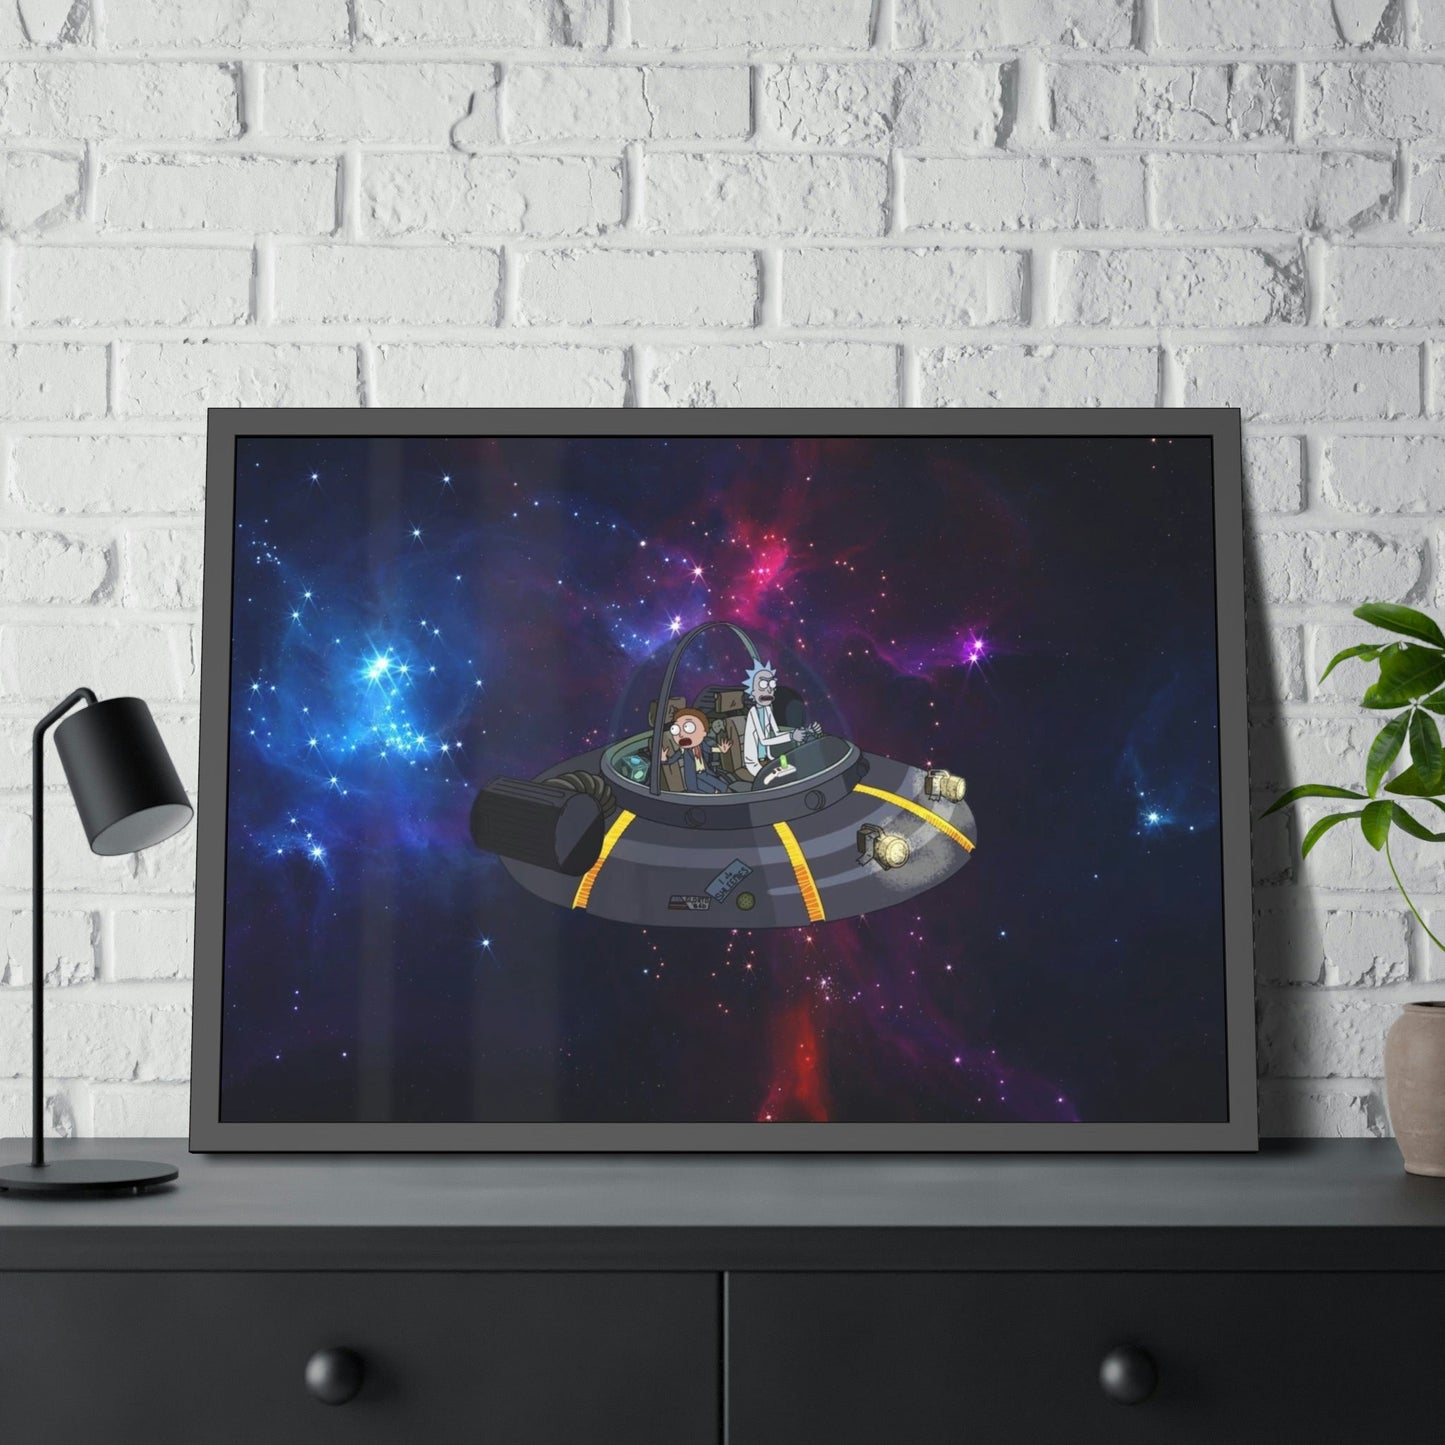 Vivid Imagination: Rick and Morty Poster Art on Canvas for a Dynamic Wall Art Display